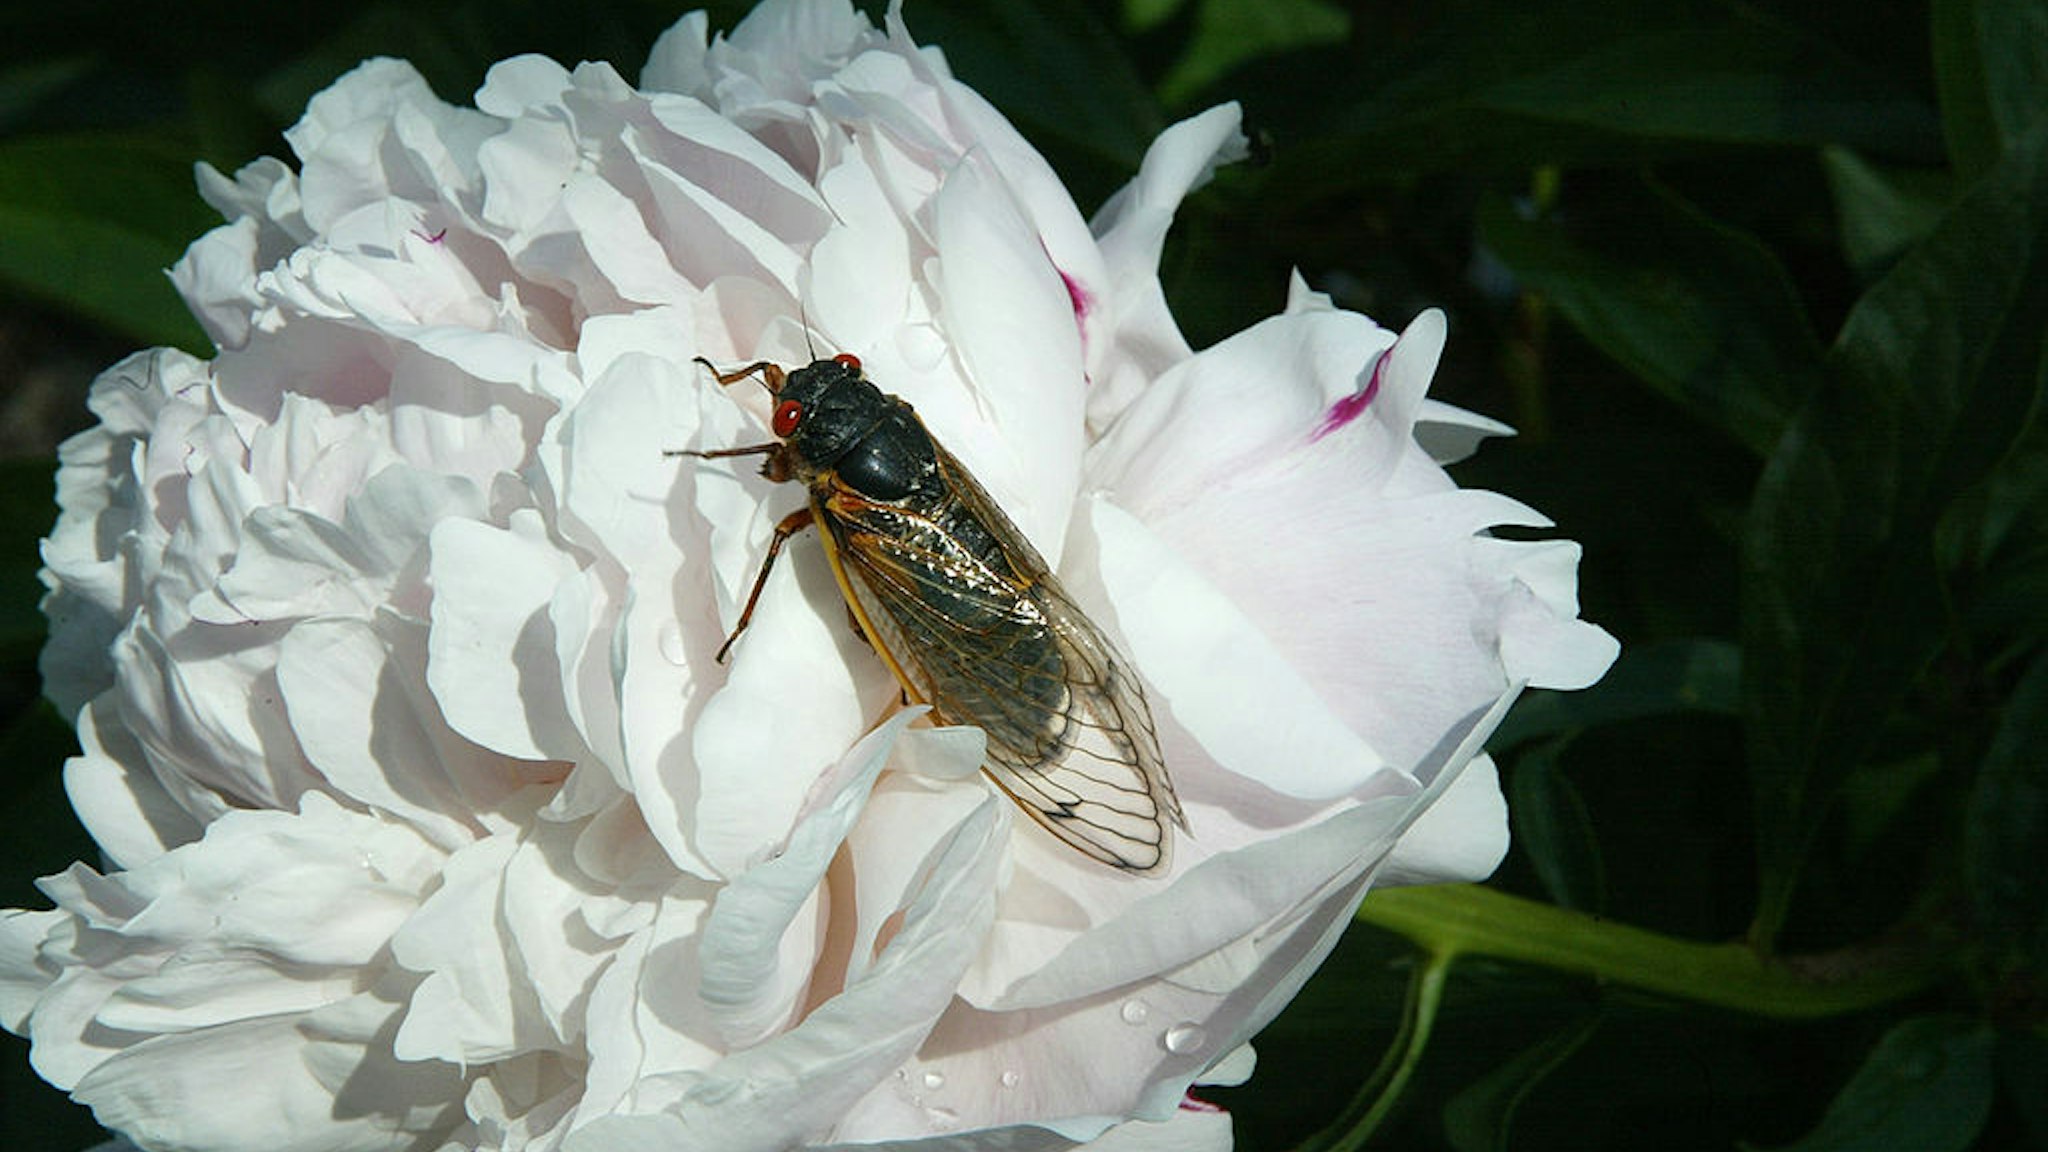 WASHINGTON - MAY 16: A newly emerged adult cicada dries its wings on a flower May 16, 2004 at a park in Washington, DC. After 17-years of living below ground, billions of cicadas belonging to Brood X begin to emerge across much of the eastern United States. The cicadas shed their larval skin, spread their wings, and fly out to mate making a tremendous noise in the process. (Photo by Alex Wong/Getty Images)